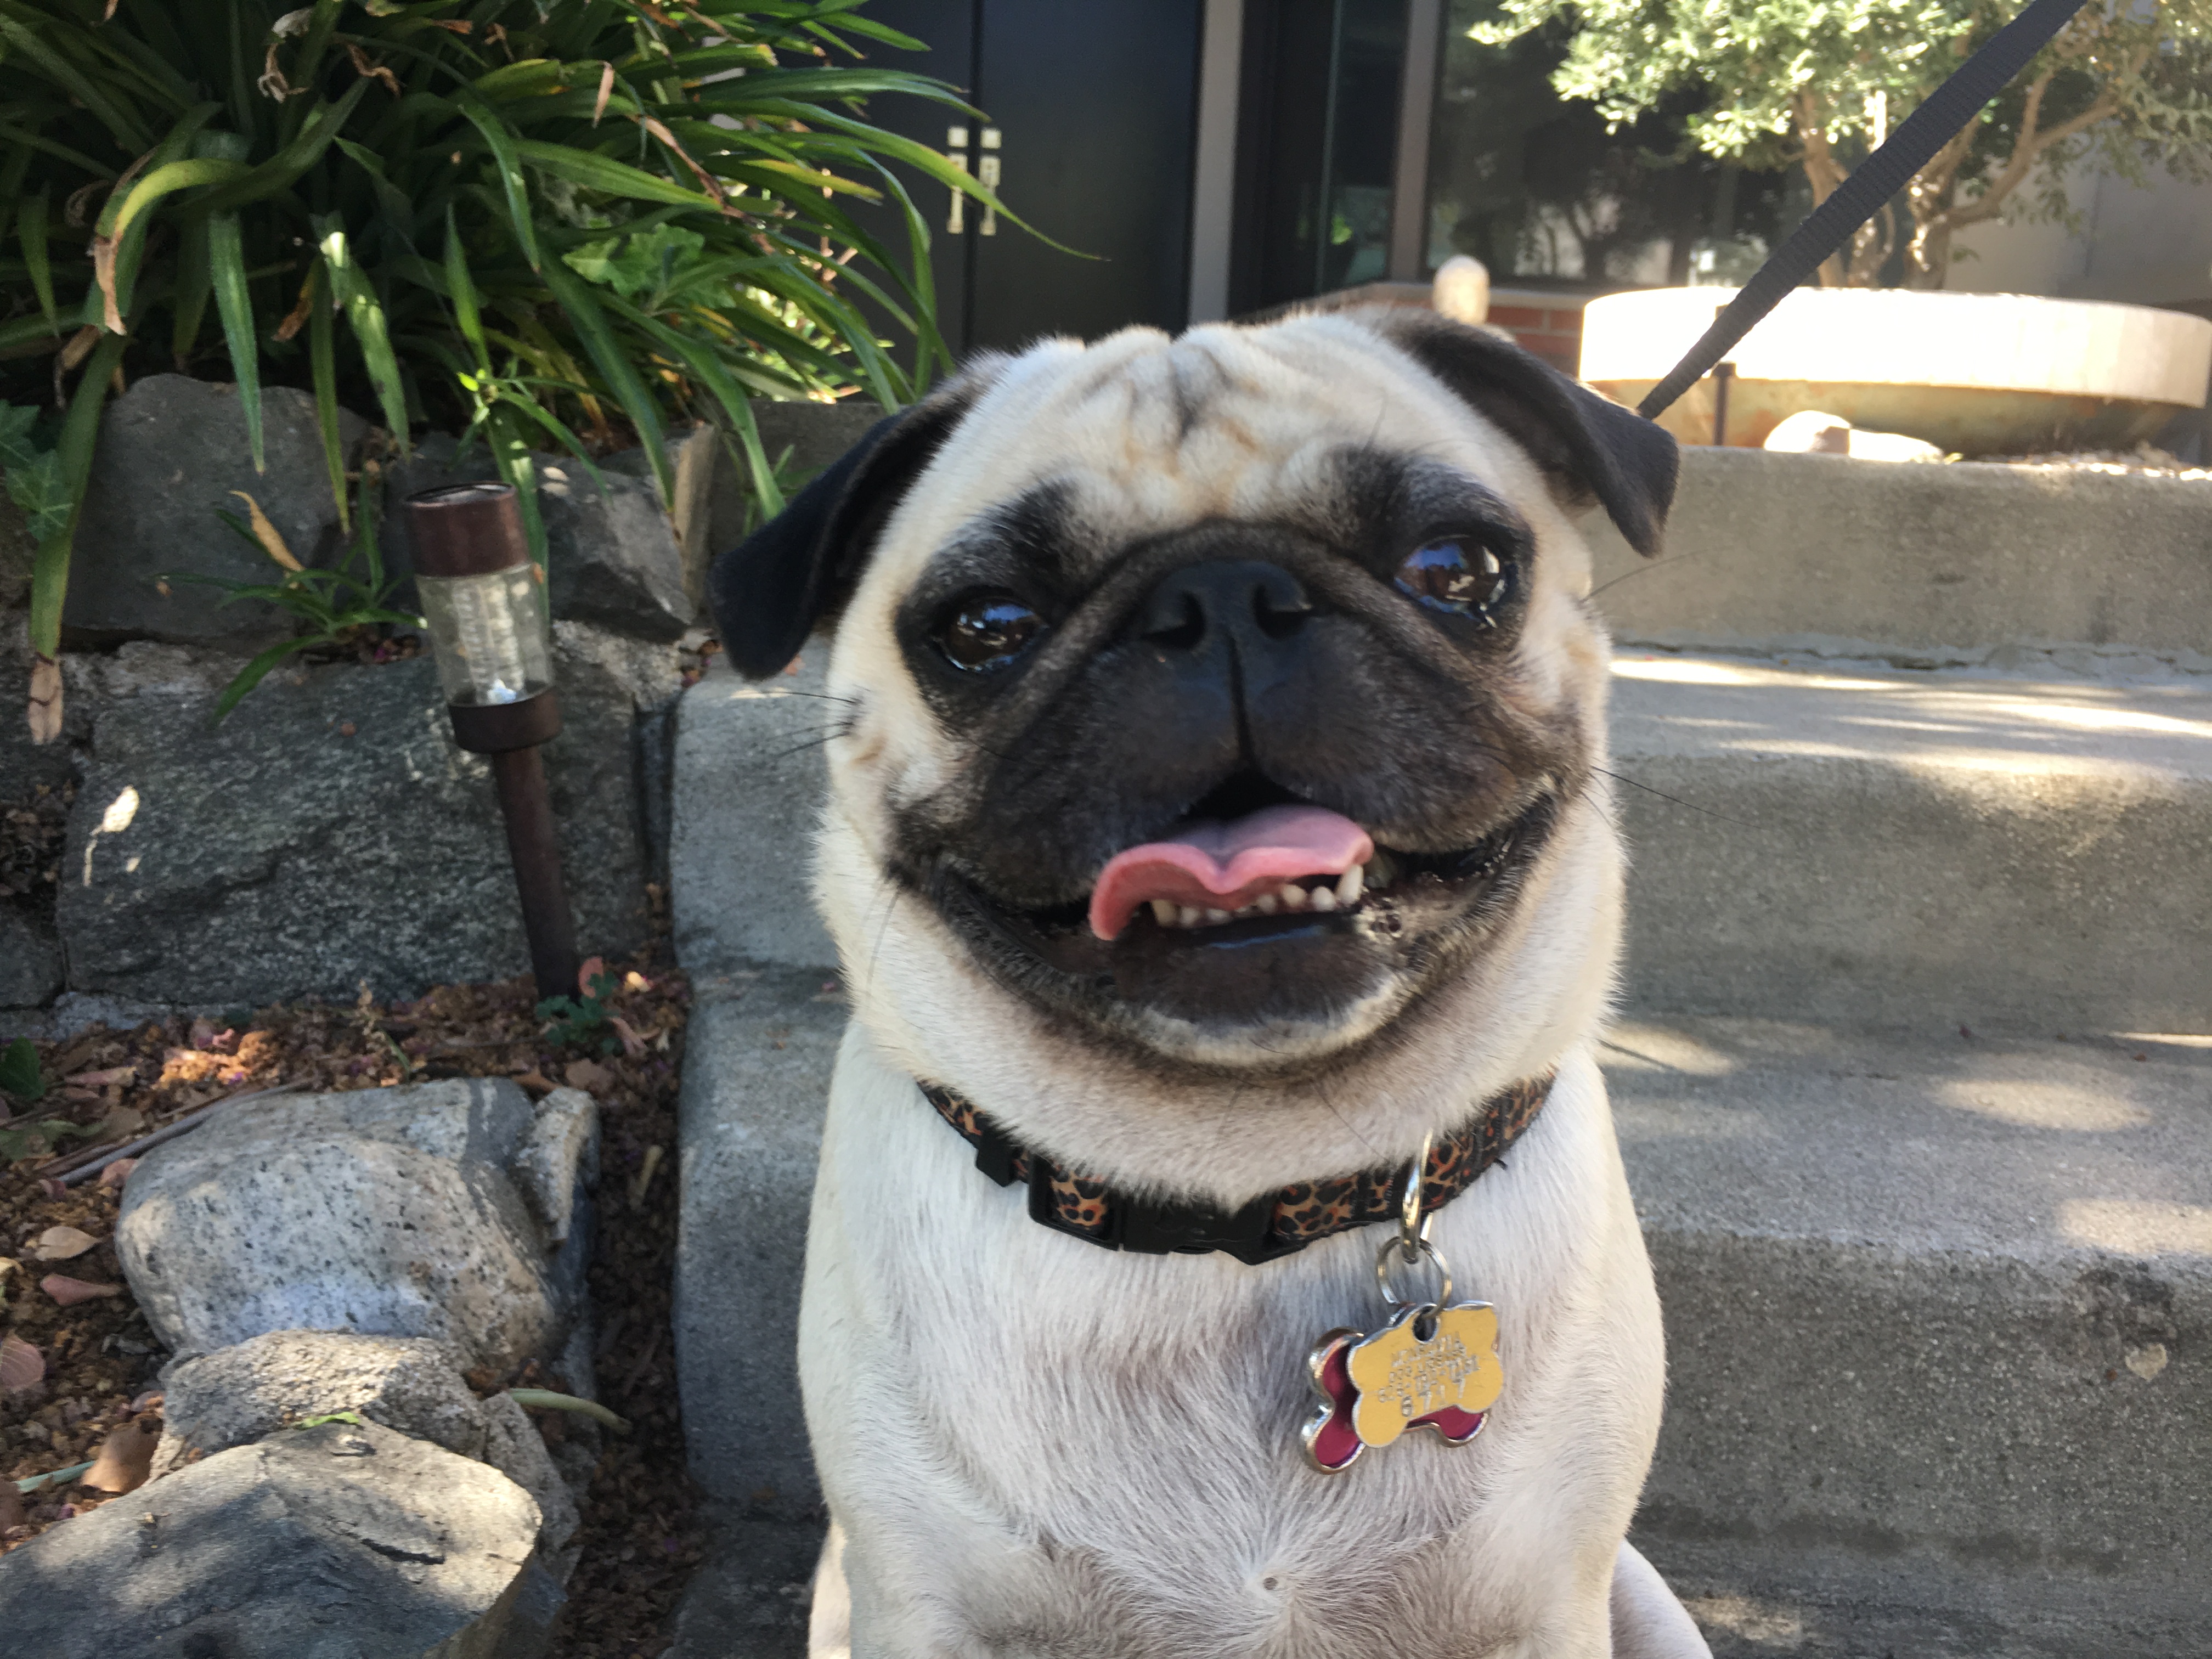 Graceee - Teaching a Los Angeles Pug to Calm Down and Behave at the Door